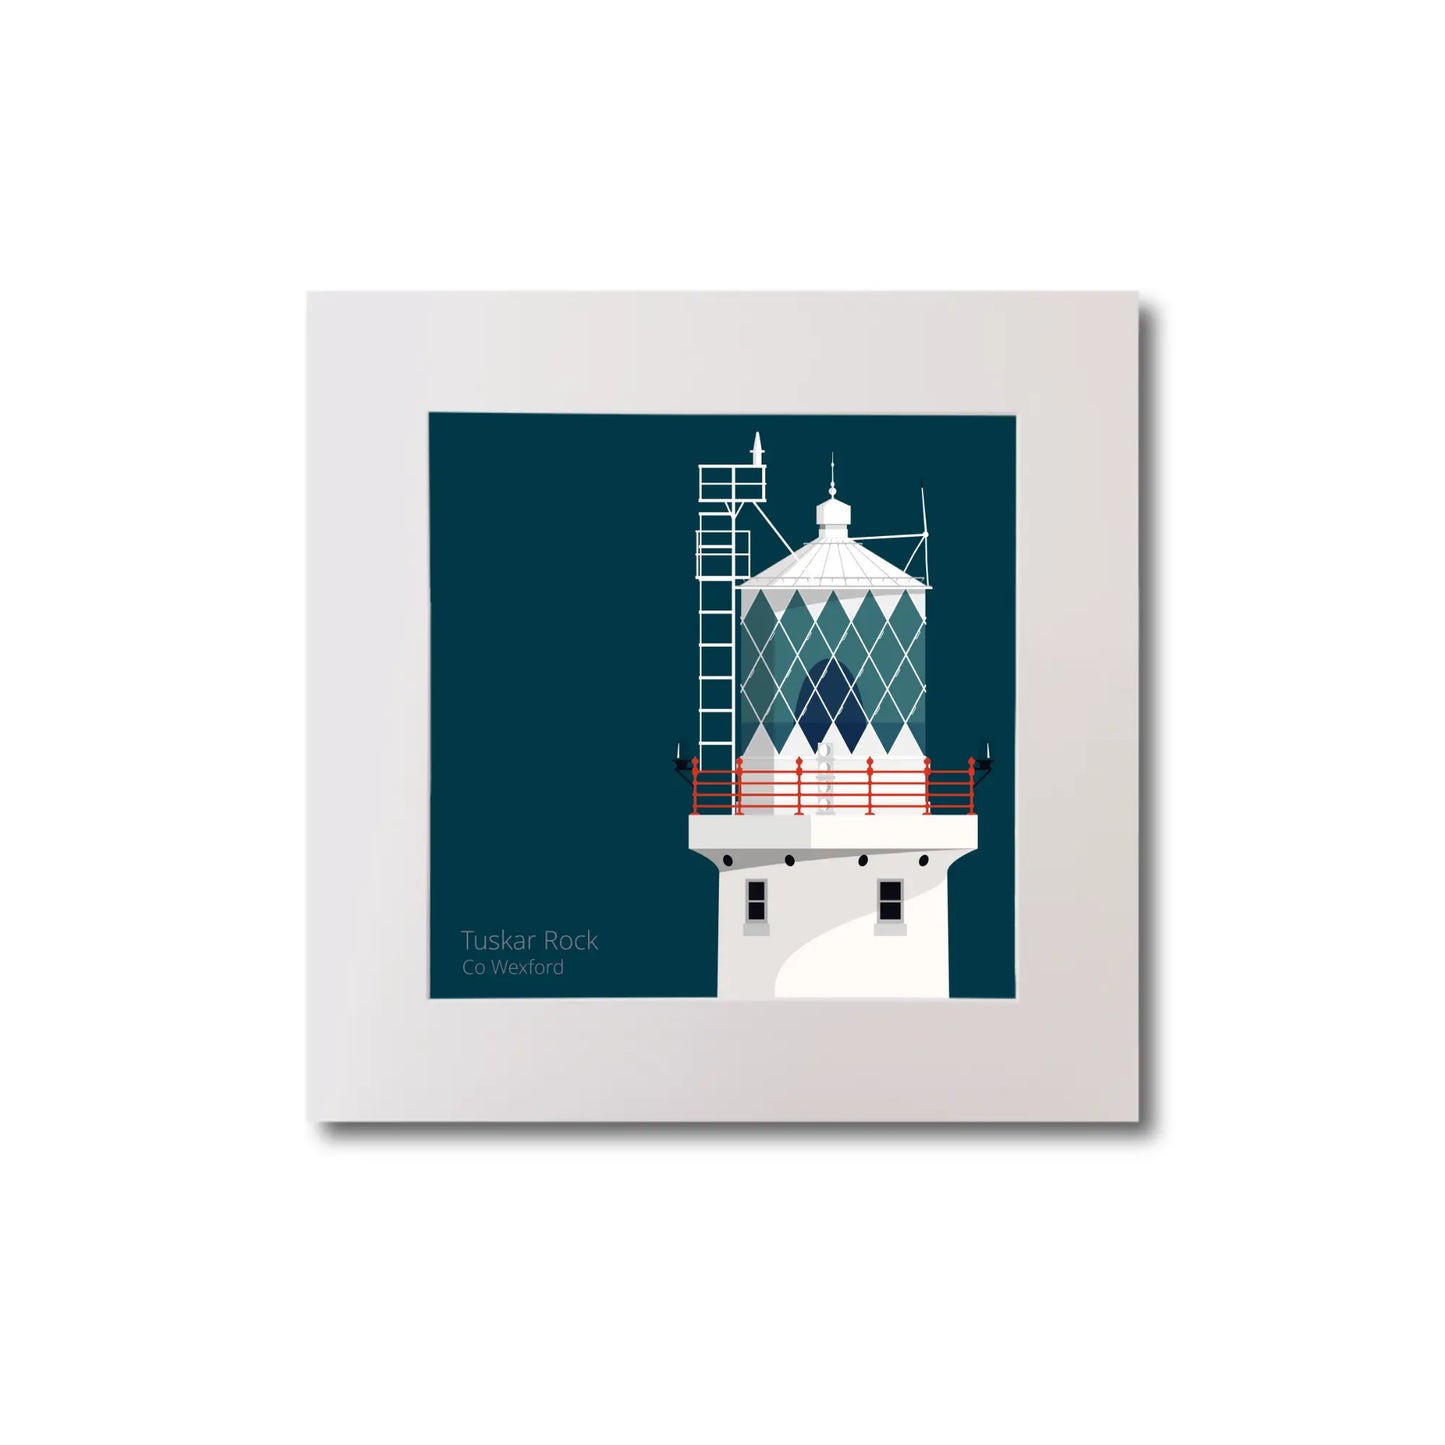 Illustration of Tuskar Rock lighthouse on a midnight blue background, mounted and measuring 20x20cm.